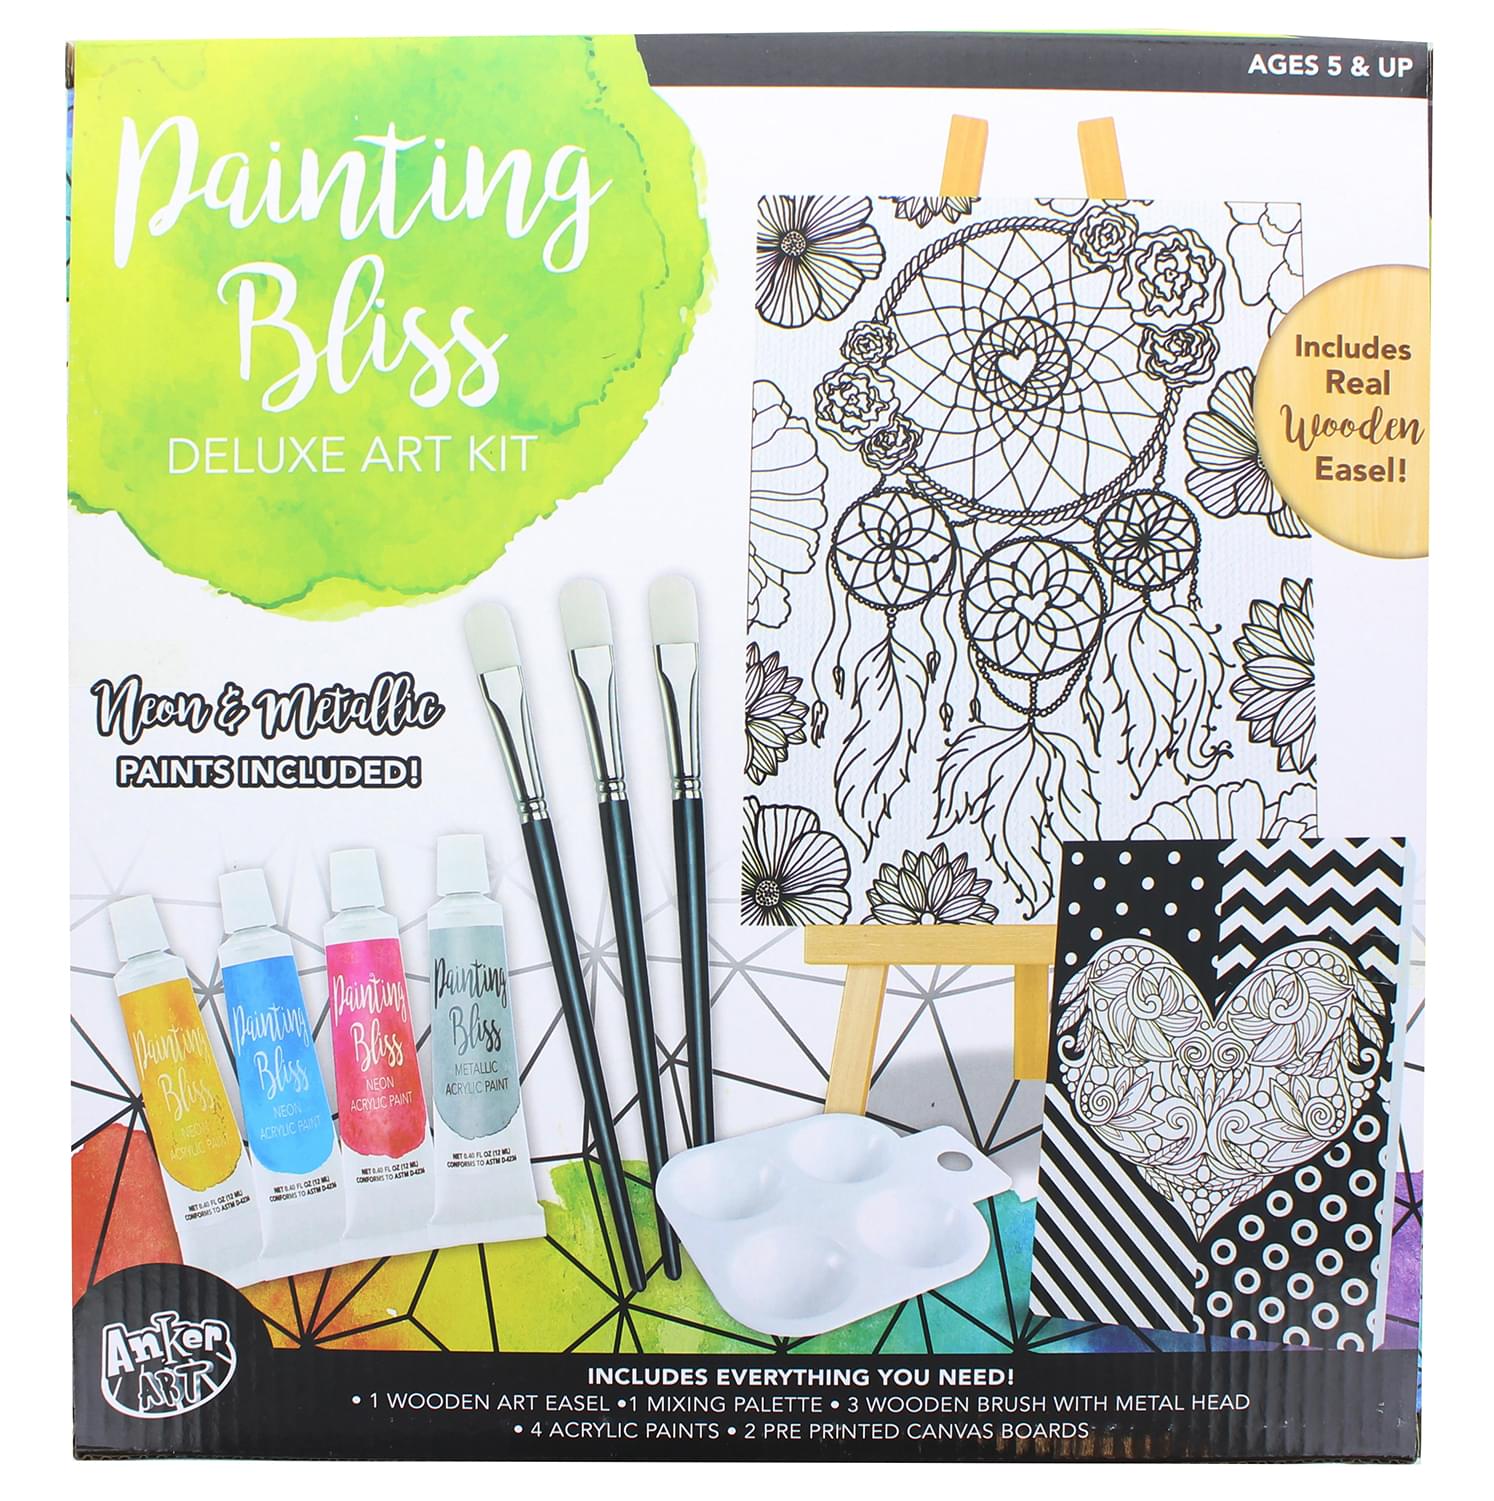 Painting Bliss Deluxe Art Kit With Wooden Tabletop Easel